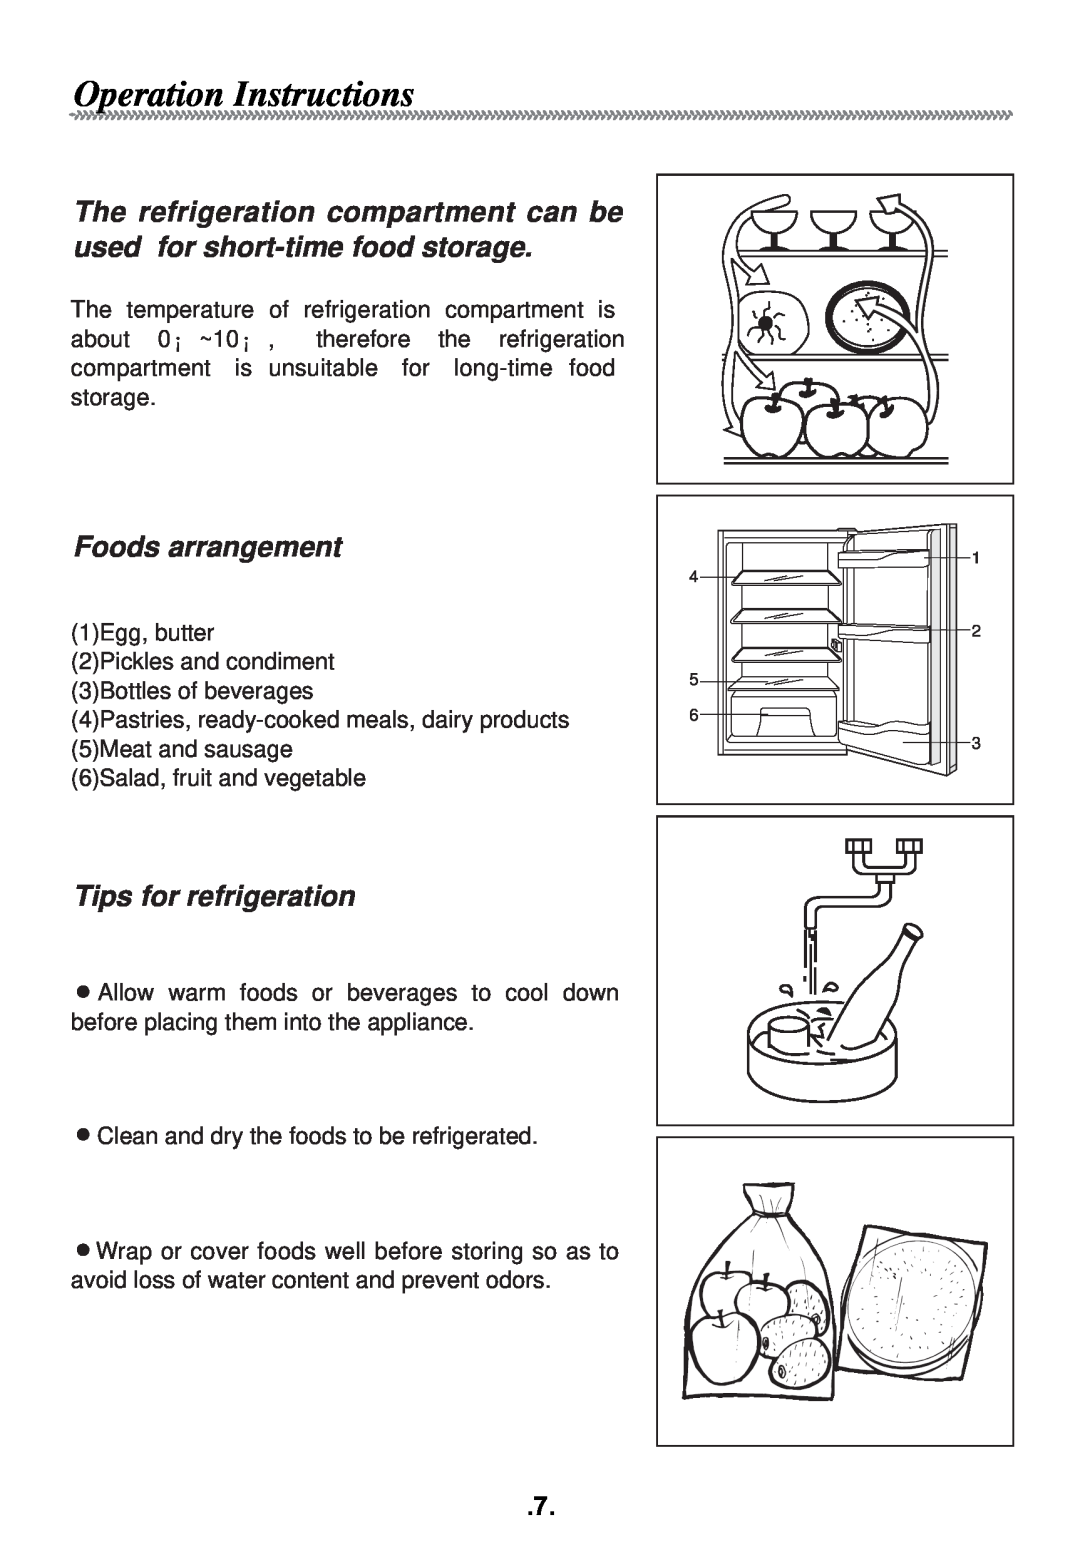 Haier AL92 manual Operation Instructions, The refrigeration compartment can be used for short-time food storage 